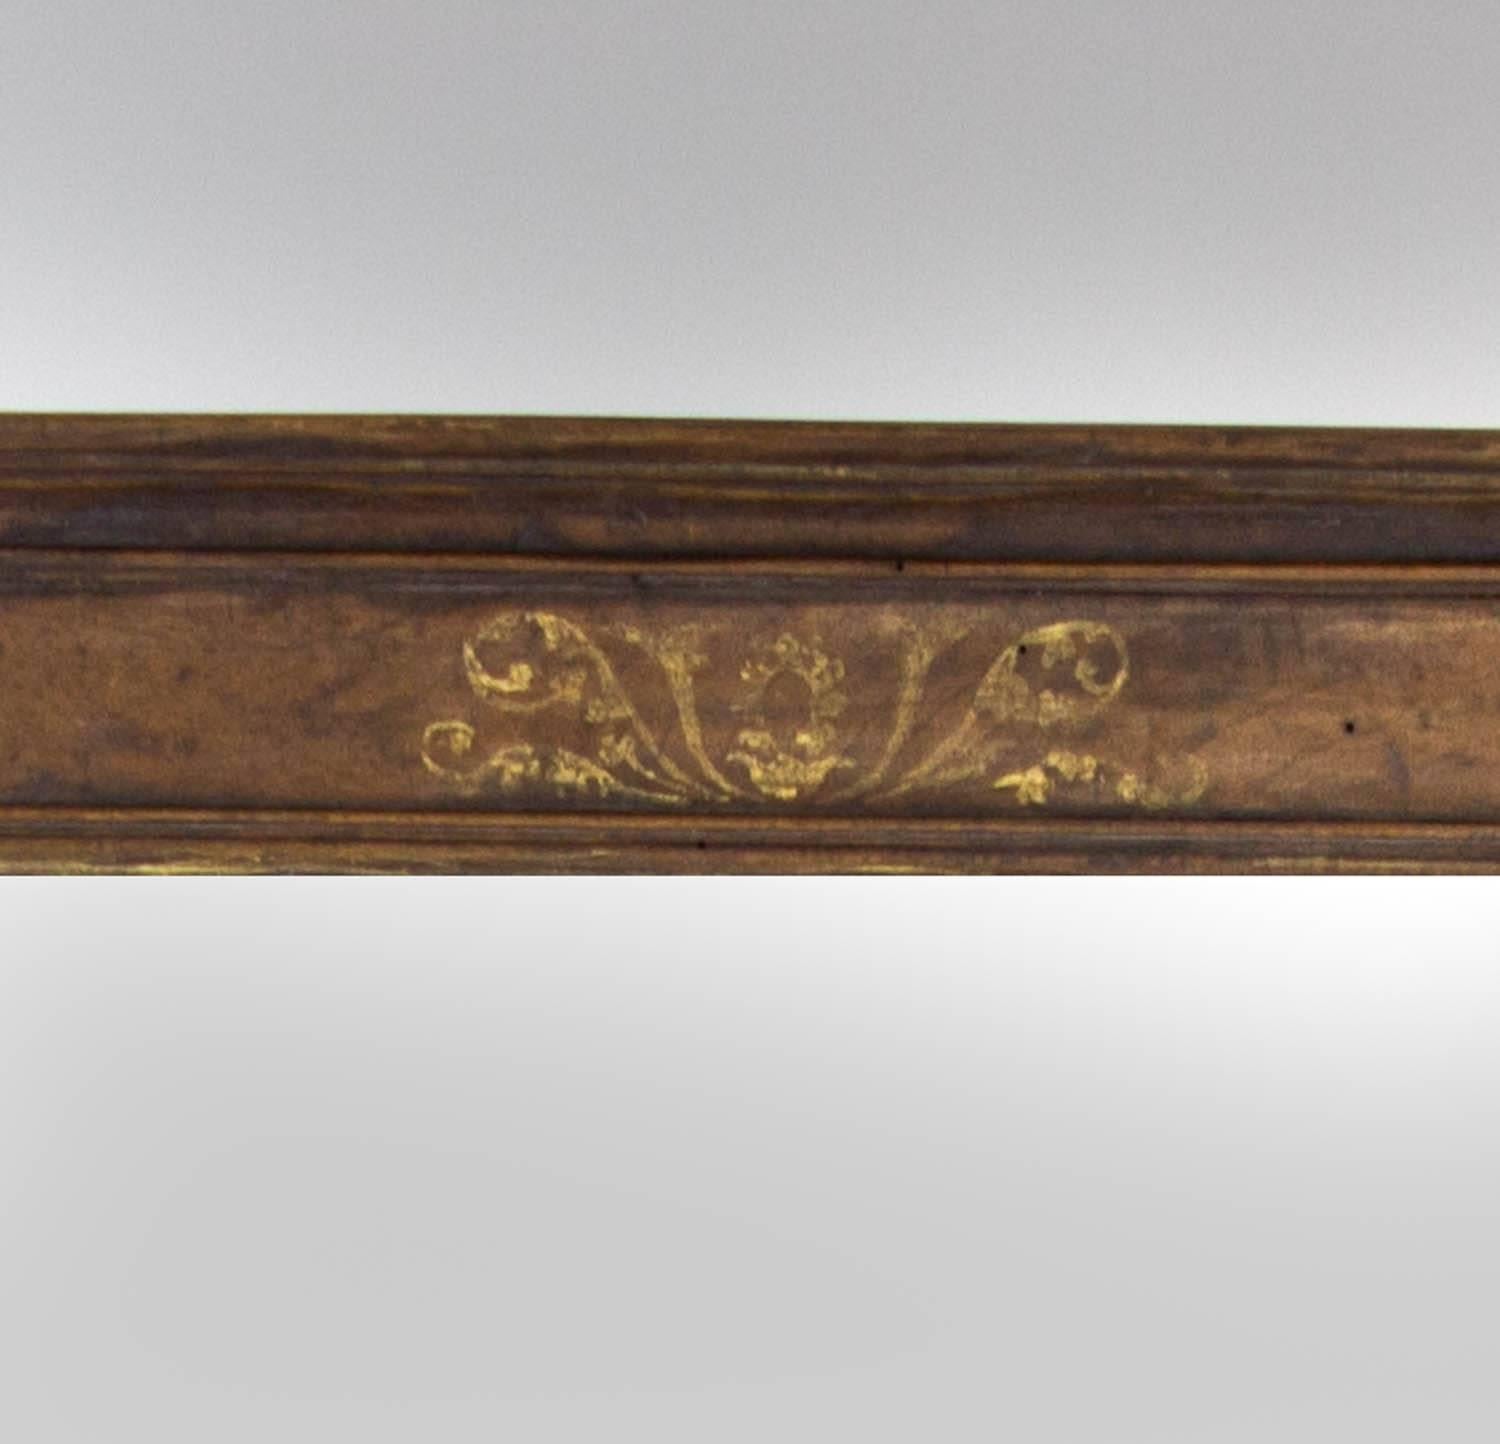 17th century Italian mirror with gilded floral decoration.

Measures: 47.5" H x 40" W x 2.5" D.